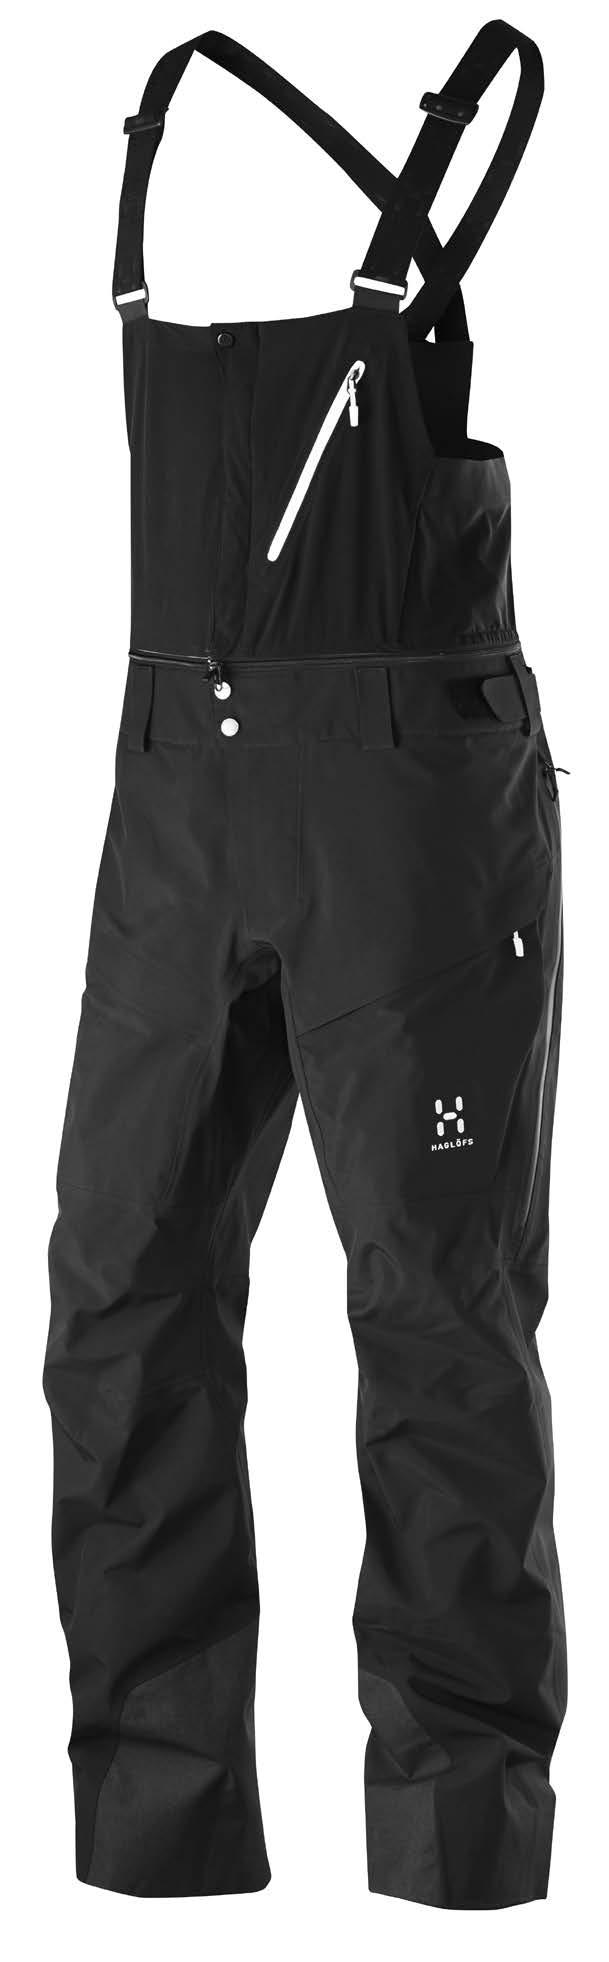 VASSI BIB MEN Vassi Bib is a pant for the dedicated off-piste skier. The durable backer is made from wind- and waterproof C-KNIT over eco-friendly Keprotec.